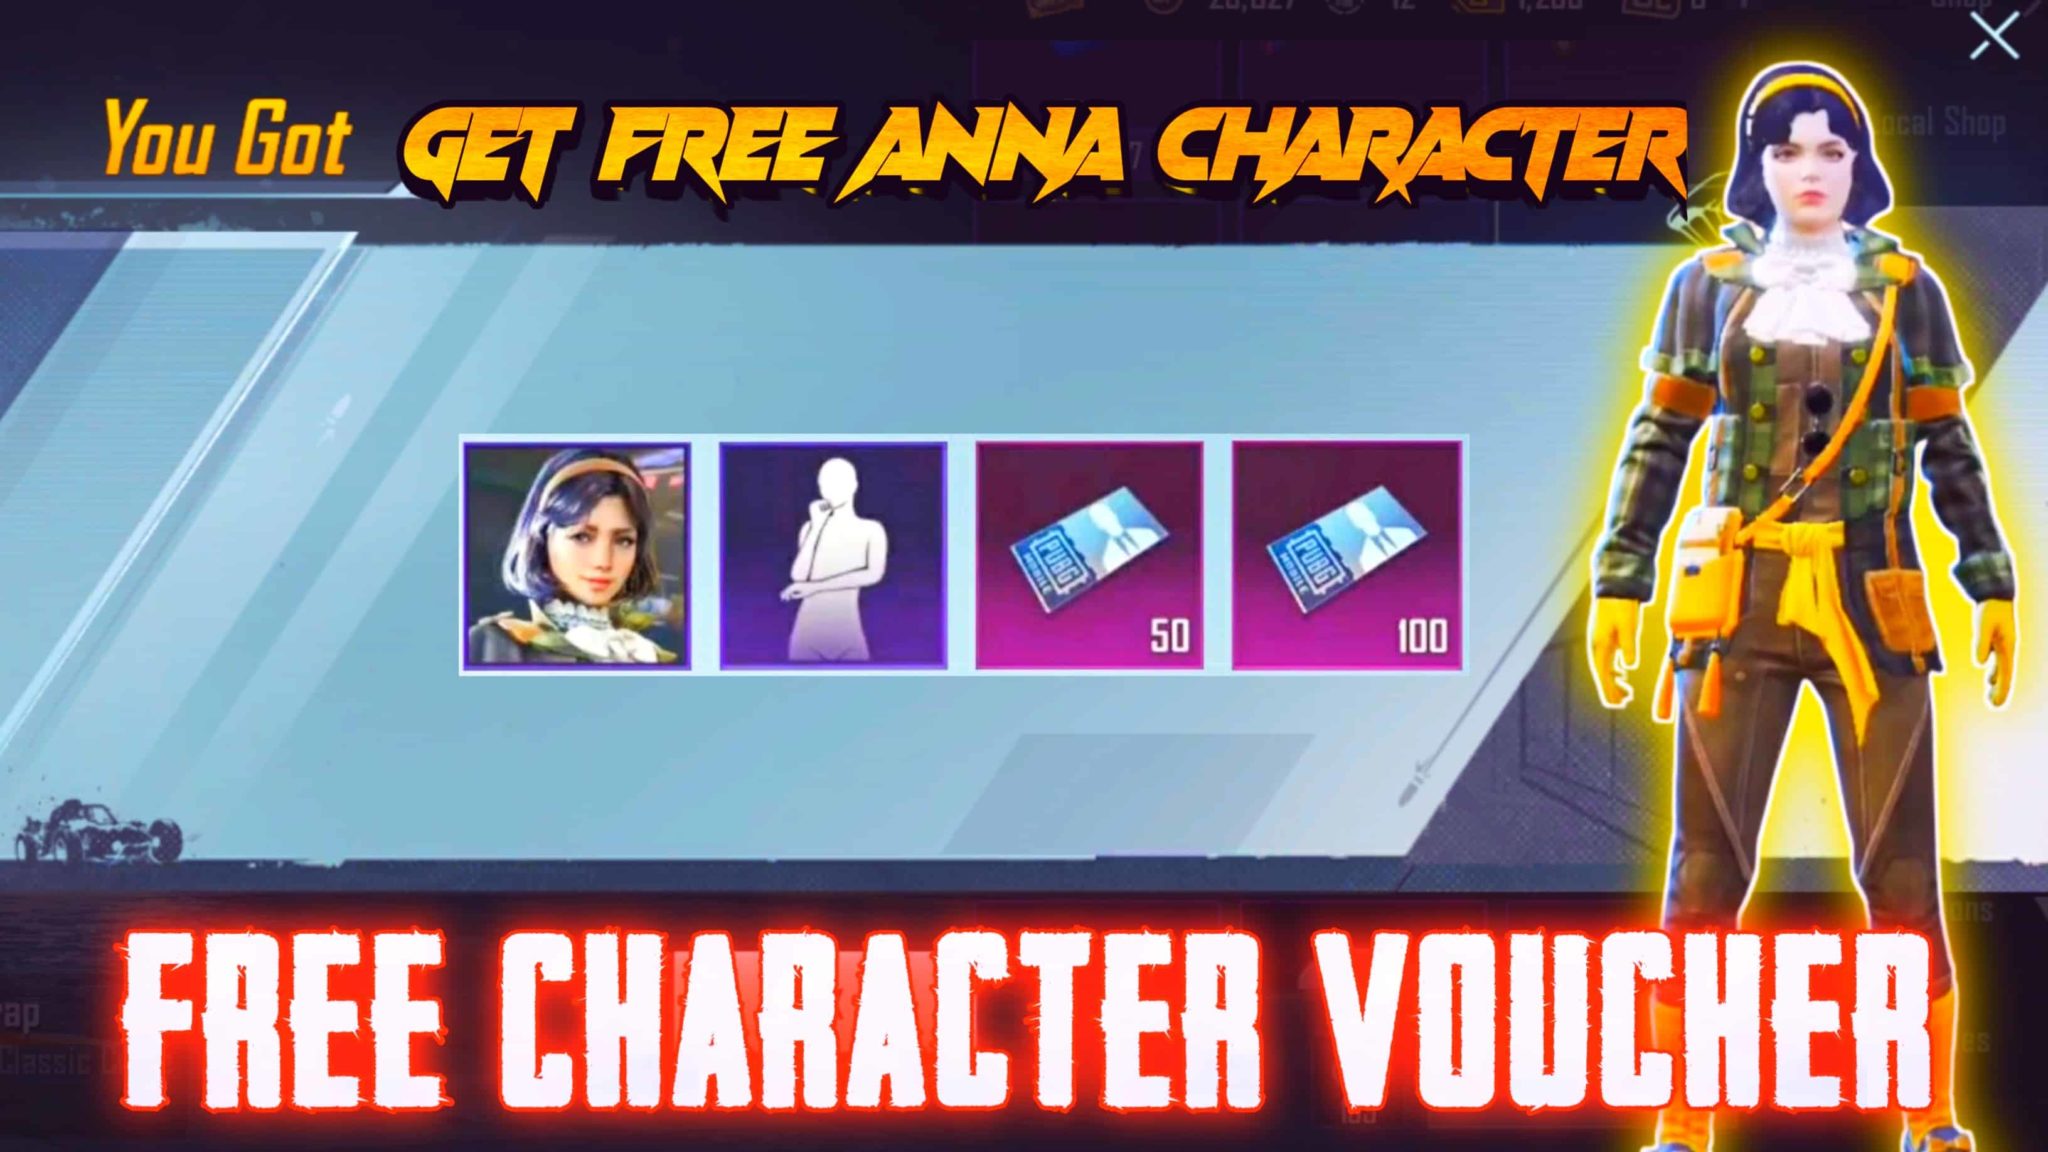 Get Free Anna Character In BGMIPUBG (Free Character Vouchers)